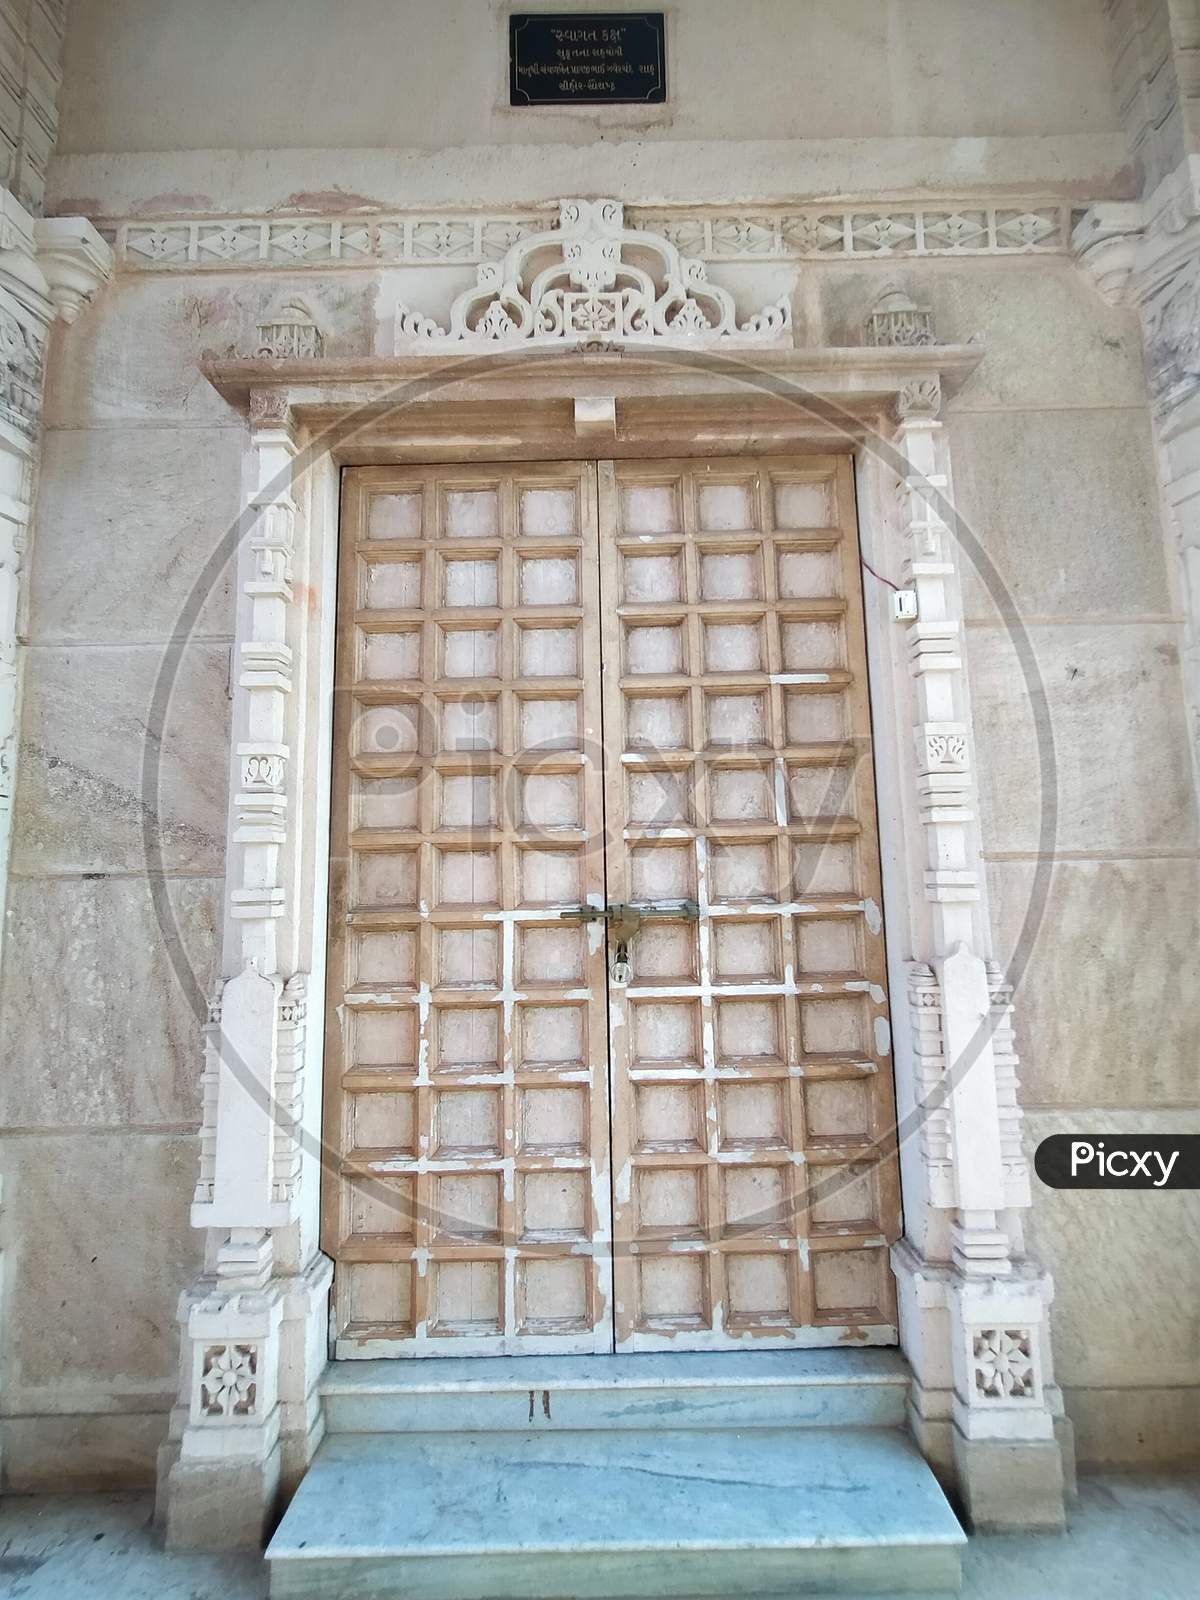 A door, historical place of Indian